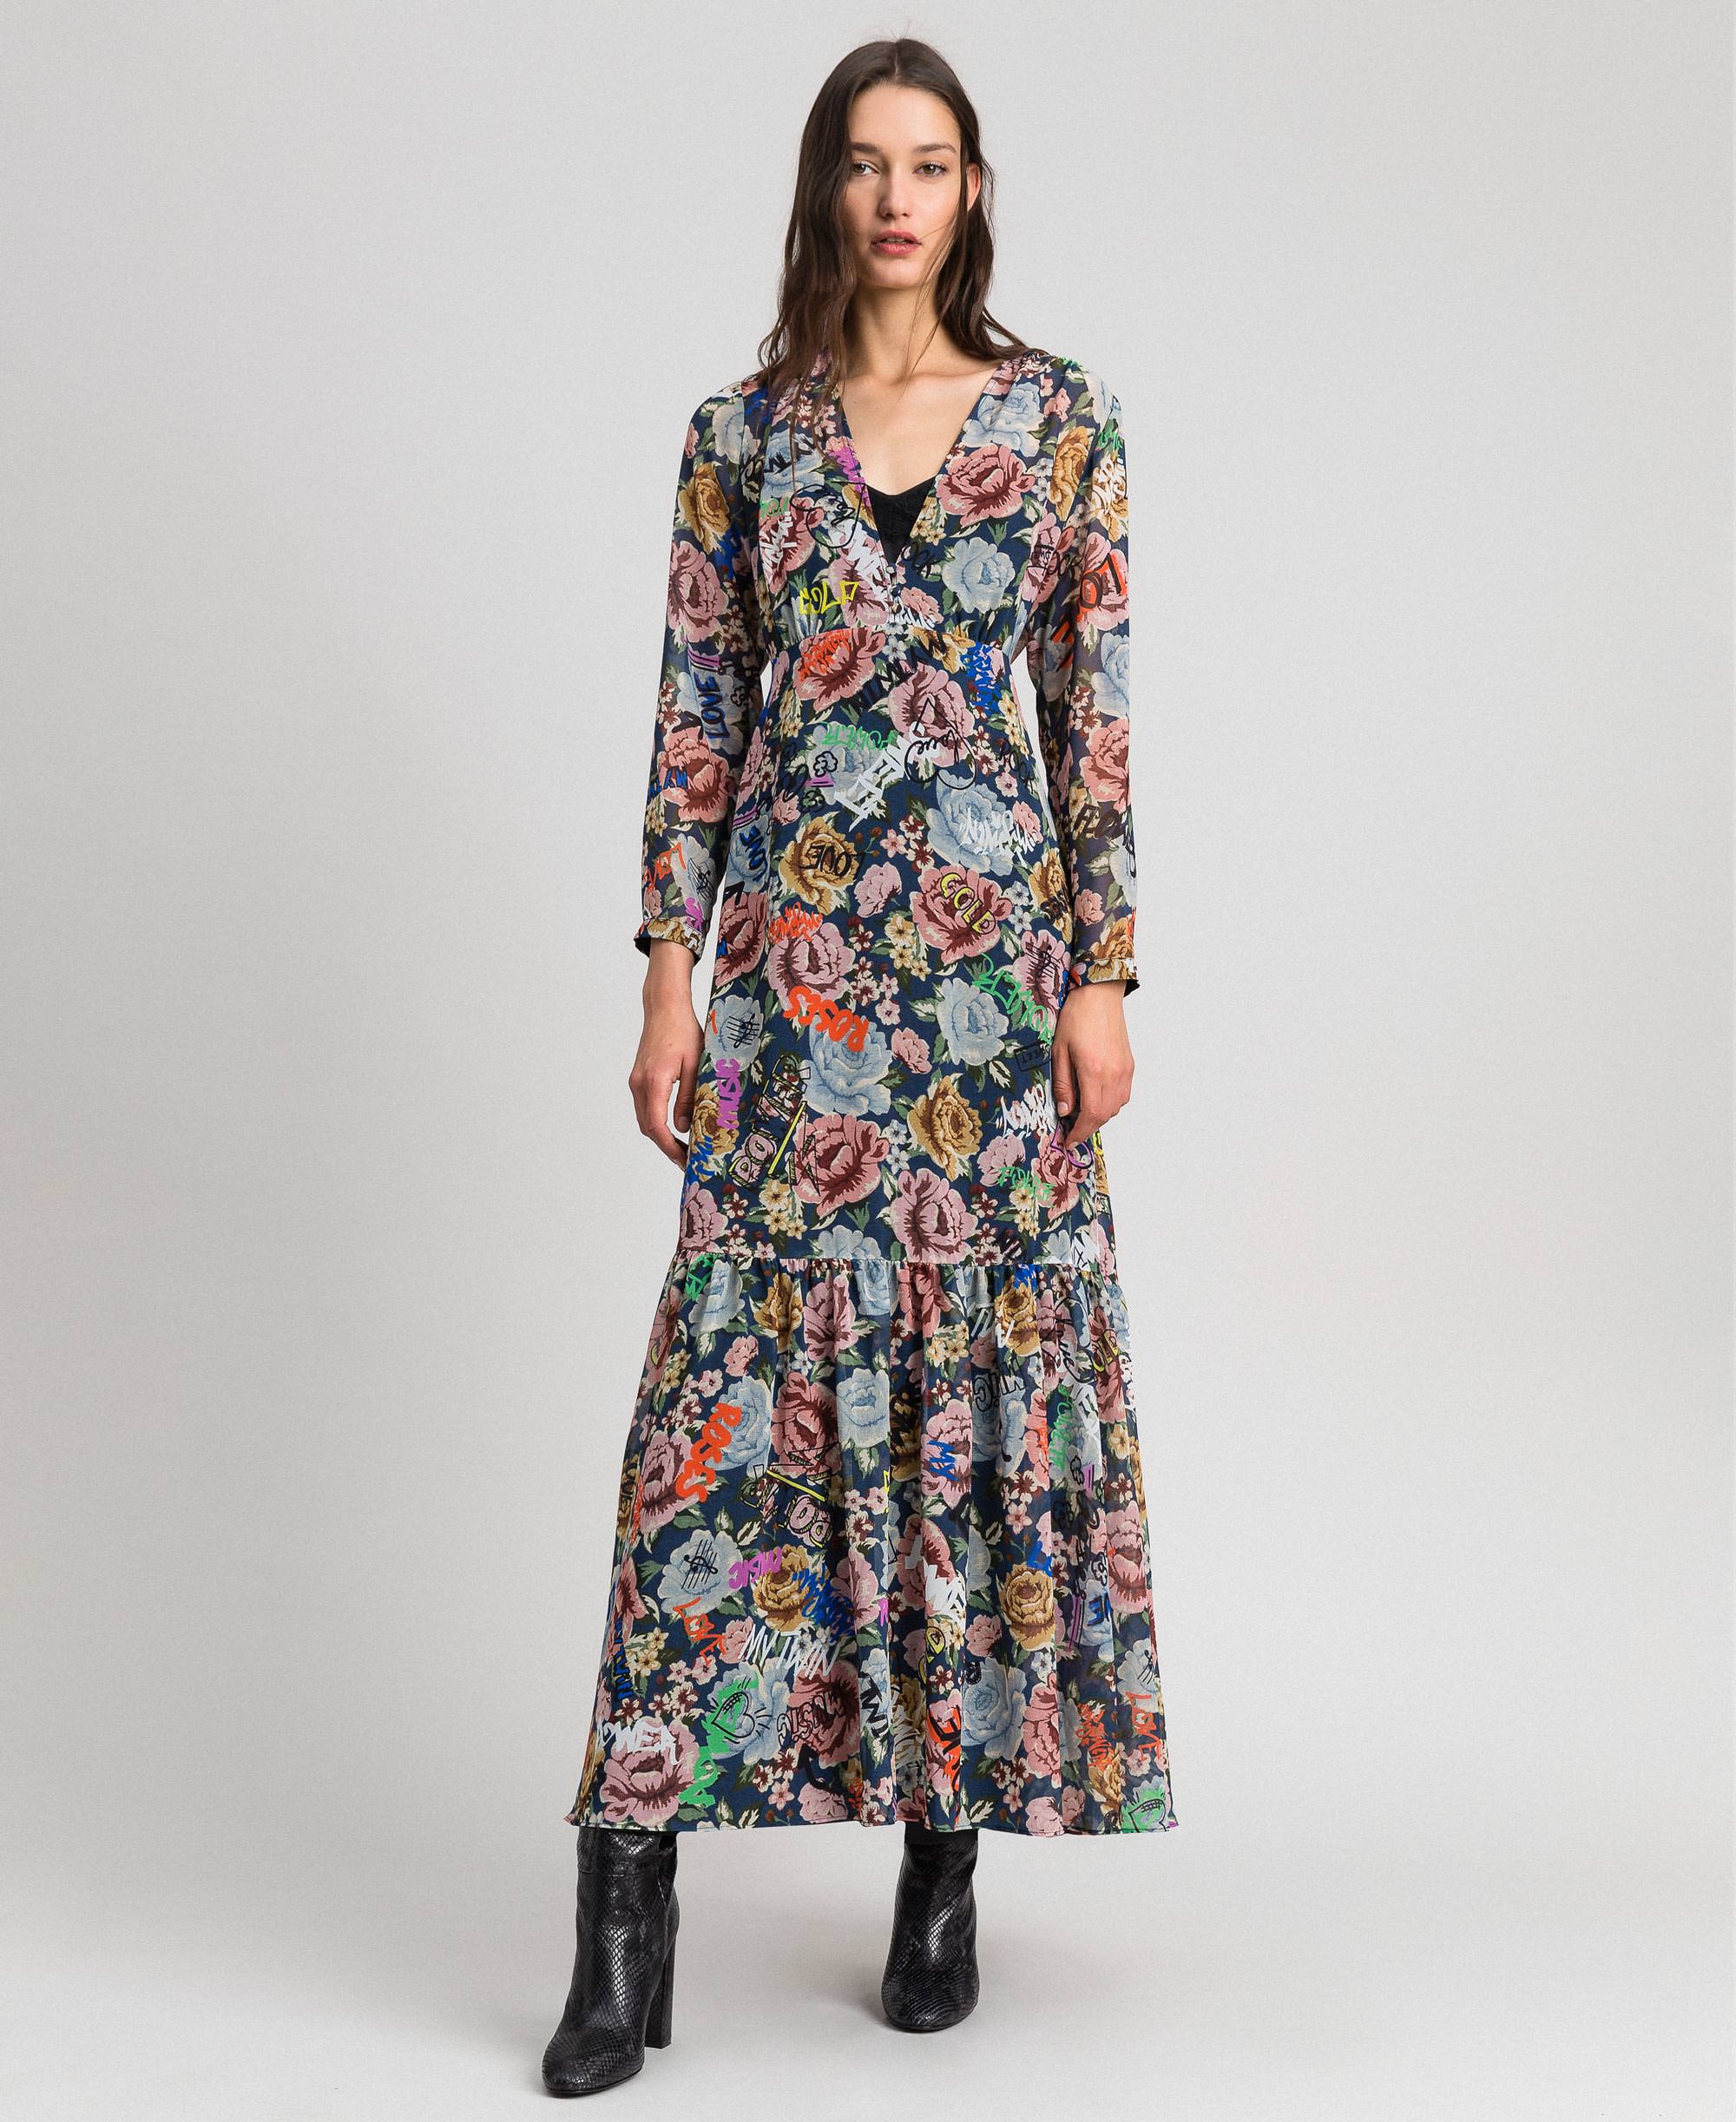 Long dress with floral and graffiti print